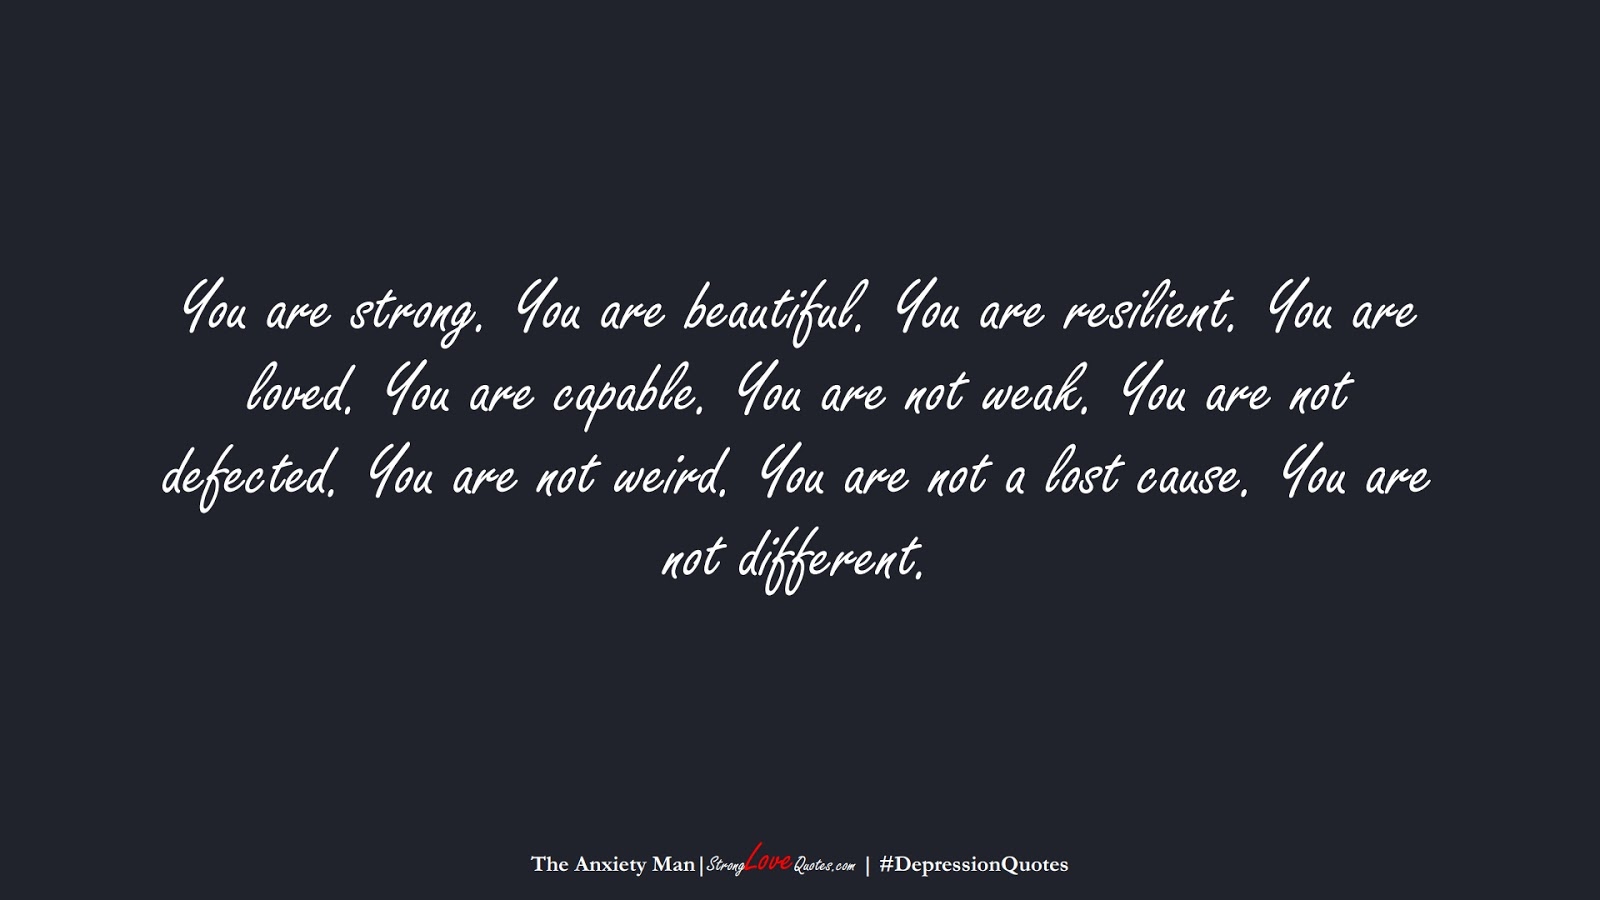 You are strong. You are beautiful. You are resilient. You are loved. You are capable. You are not weak. You are not defected. You are not weird. You are not a lost cause. You are not different. (The Anxiety Man);  #DepressionQuotes